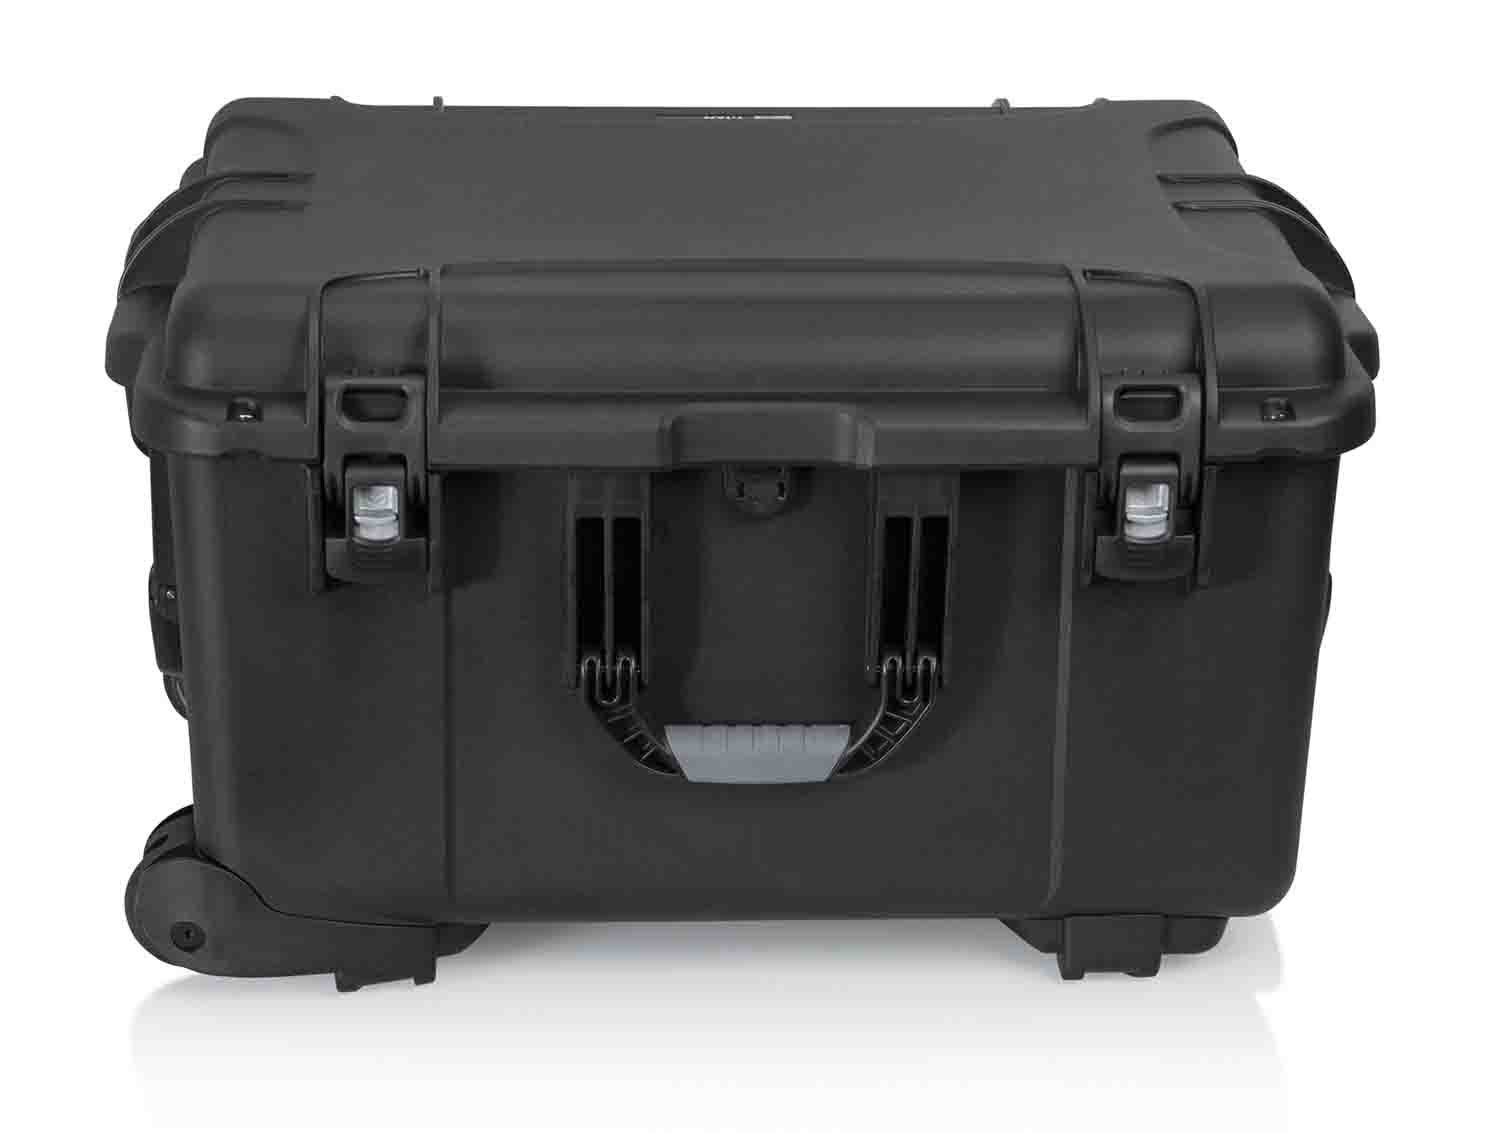 Gator Cases GWP-TITANRODECASTER4 Titan Case for Rodecaster Pro, 4 Mics and 4 Headsets - Hollywood DJ